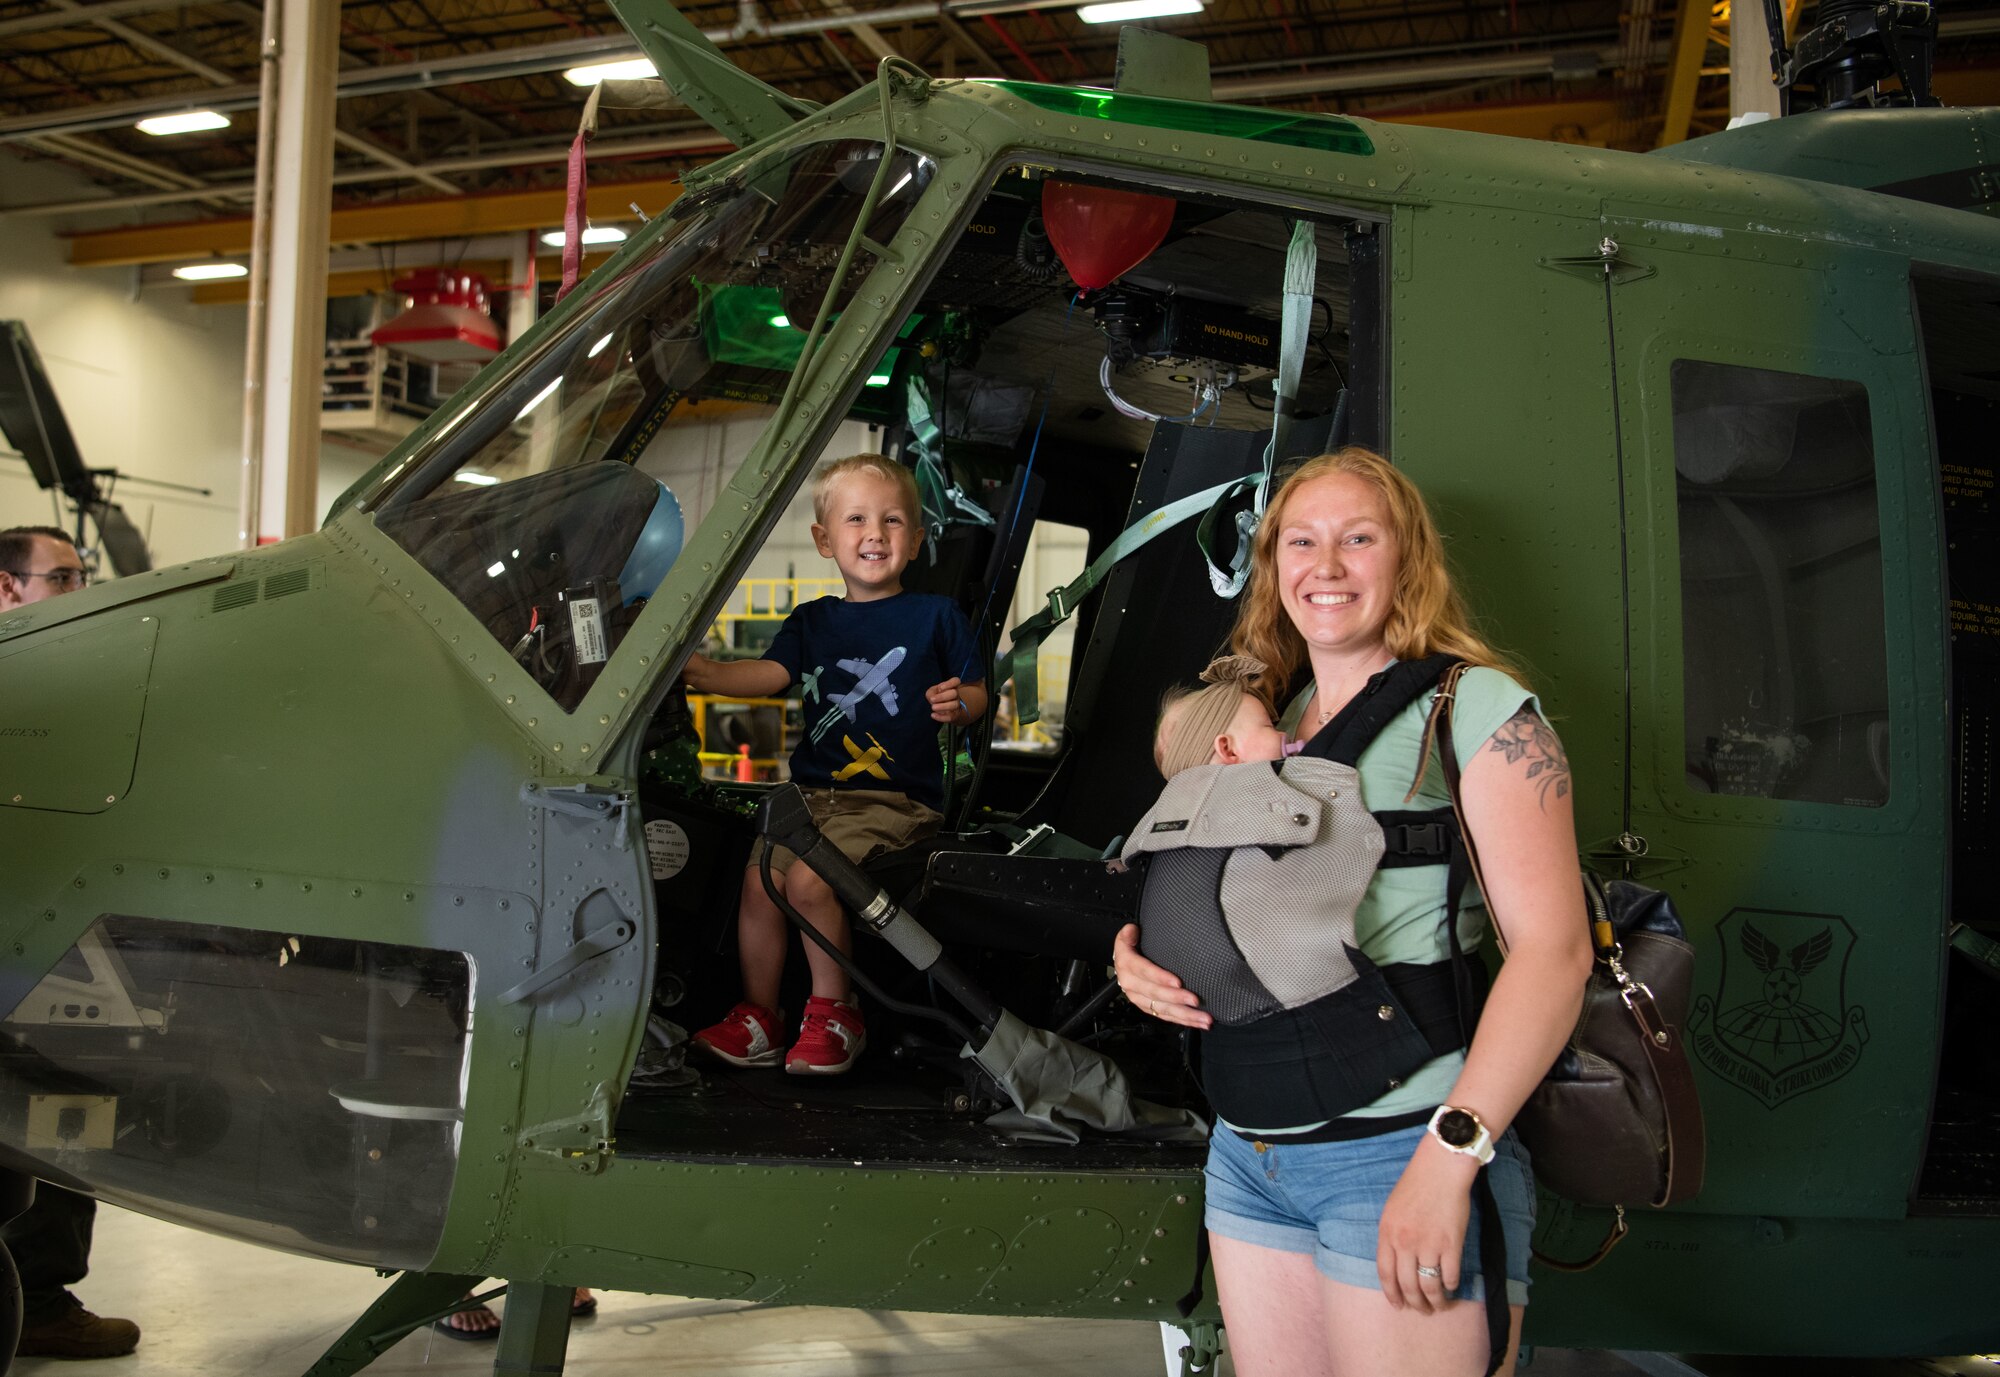 Wyatt, 3, and his mother Kaylee explore a UH-1N Huey at F. E. Warren Air Force Base, Wyoming, June 18, 2021. Dependents and family members were invited to visit various units across the base for the 90th Missile Wing Family Weekend activities. (U.S. Air Force photo by Jordan Pickett)